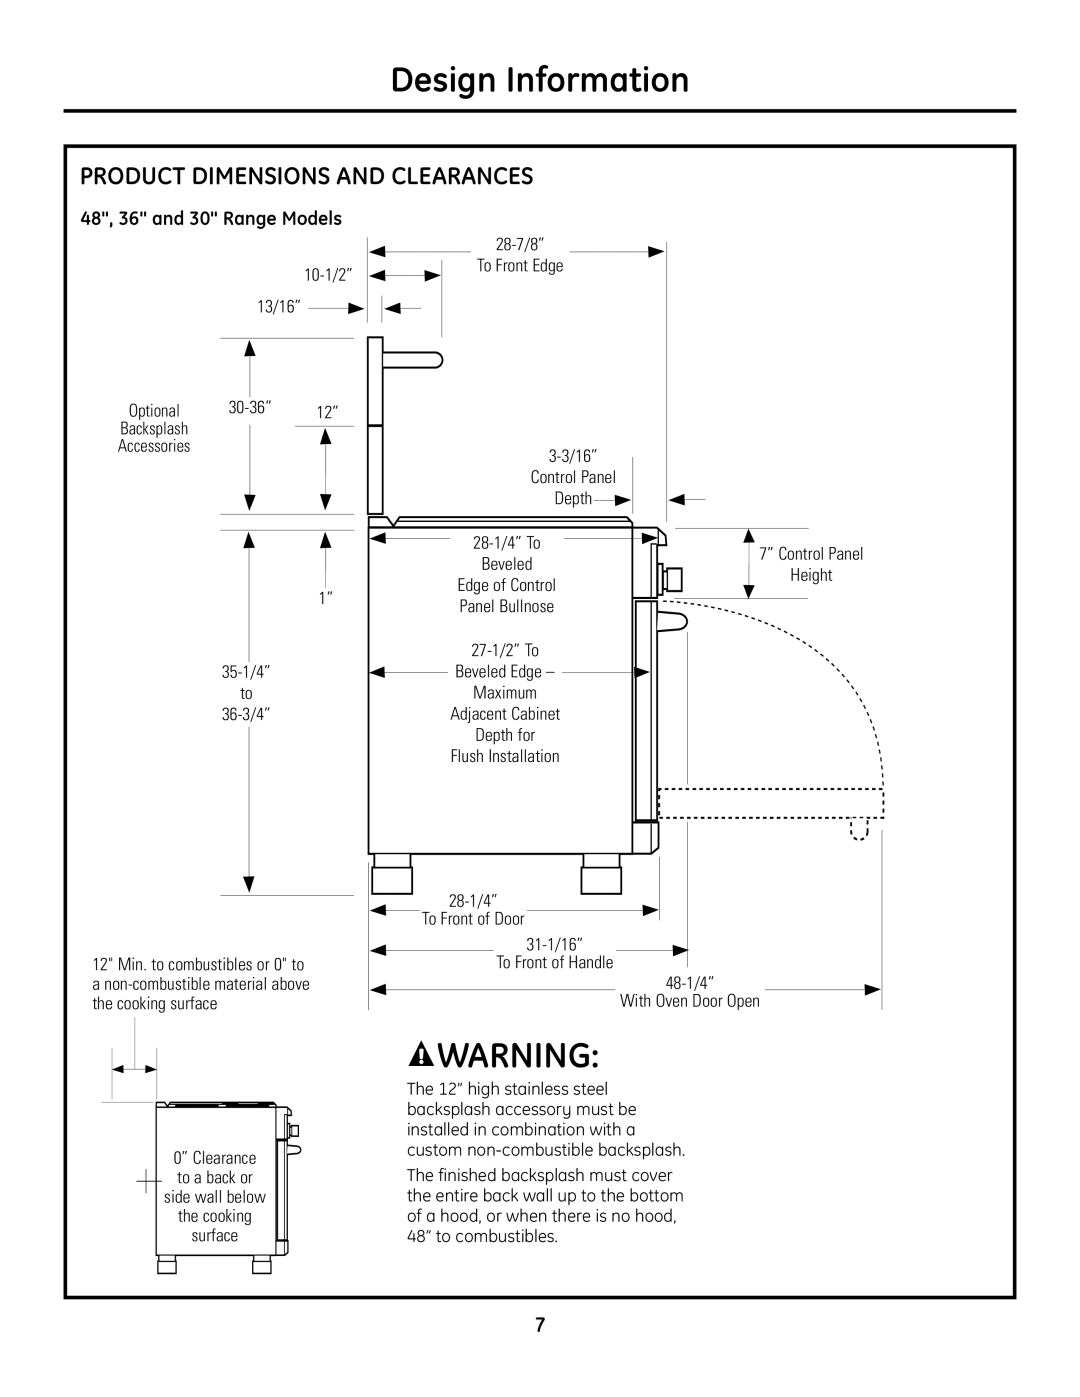 GE Monogram installation instructions Product Dimensions And Clearances, 48, 36 and 30 Range Models, Design Information 